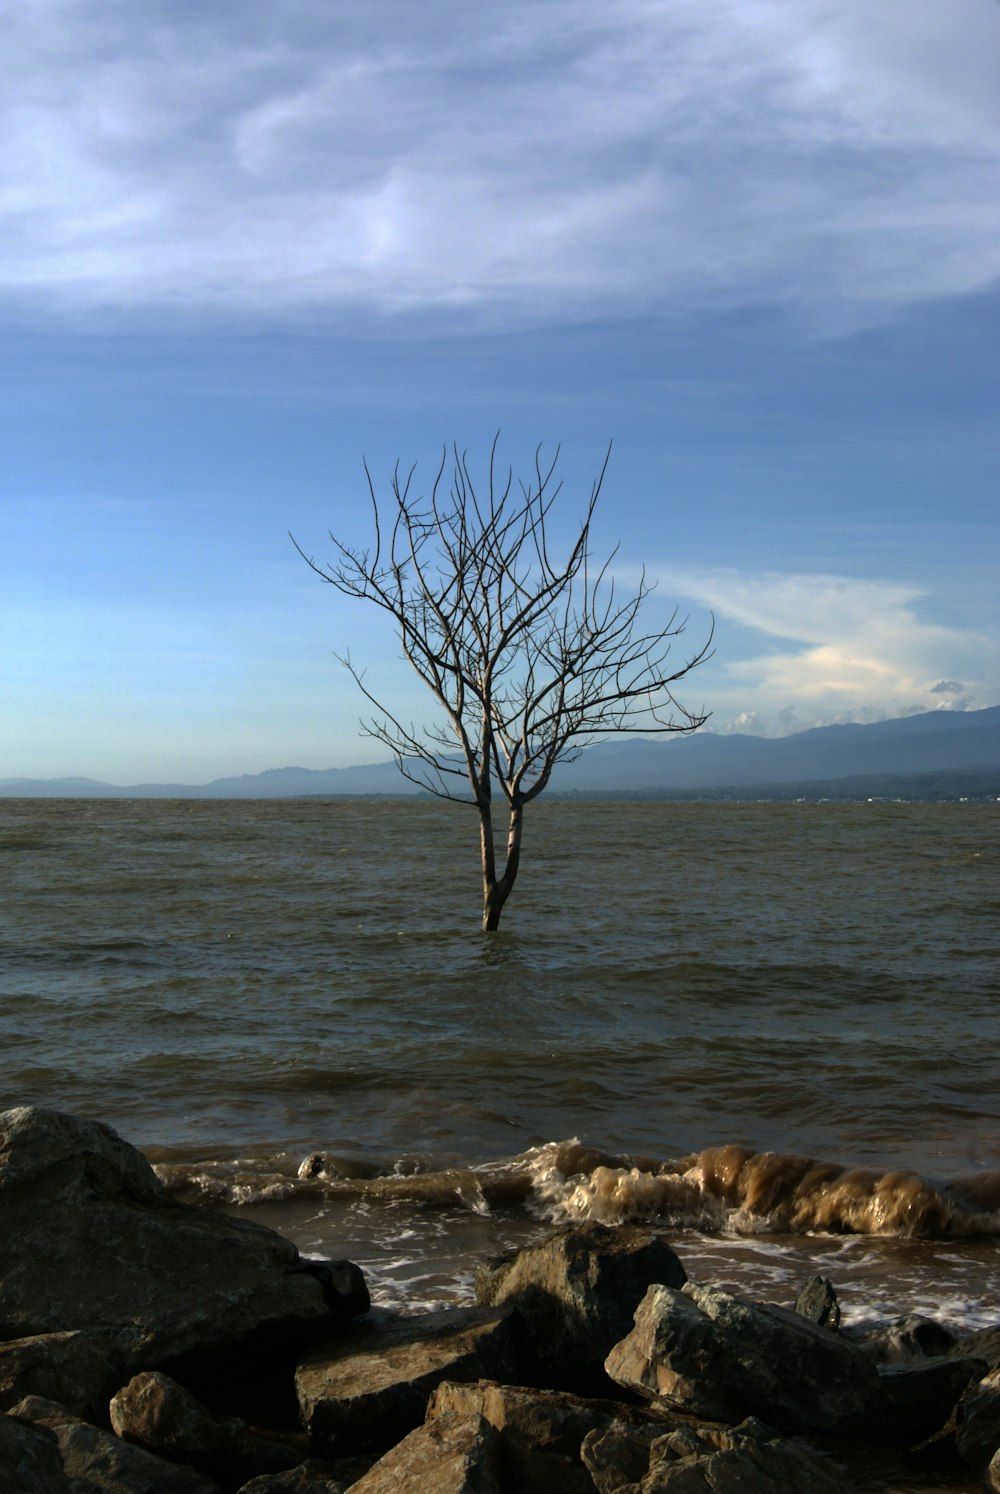 leafless tree on rocky shore by the sea under blue sky during daytime